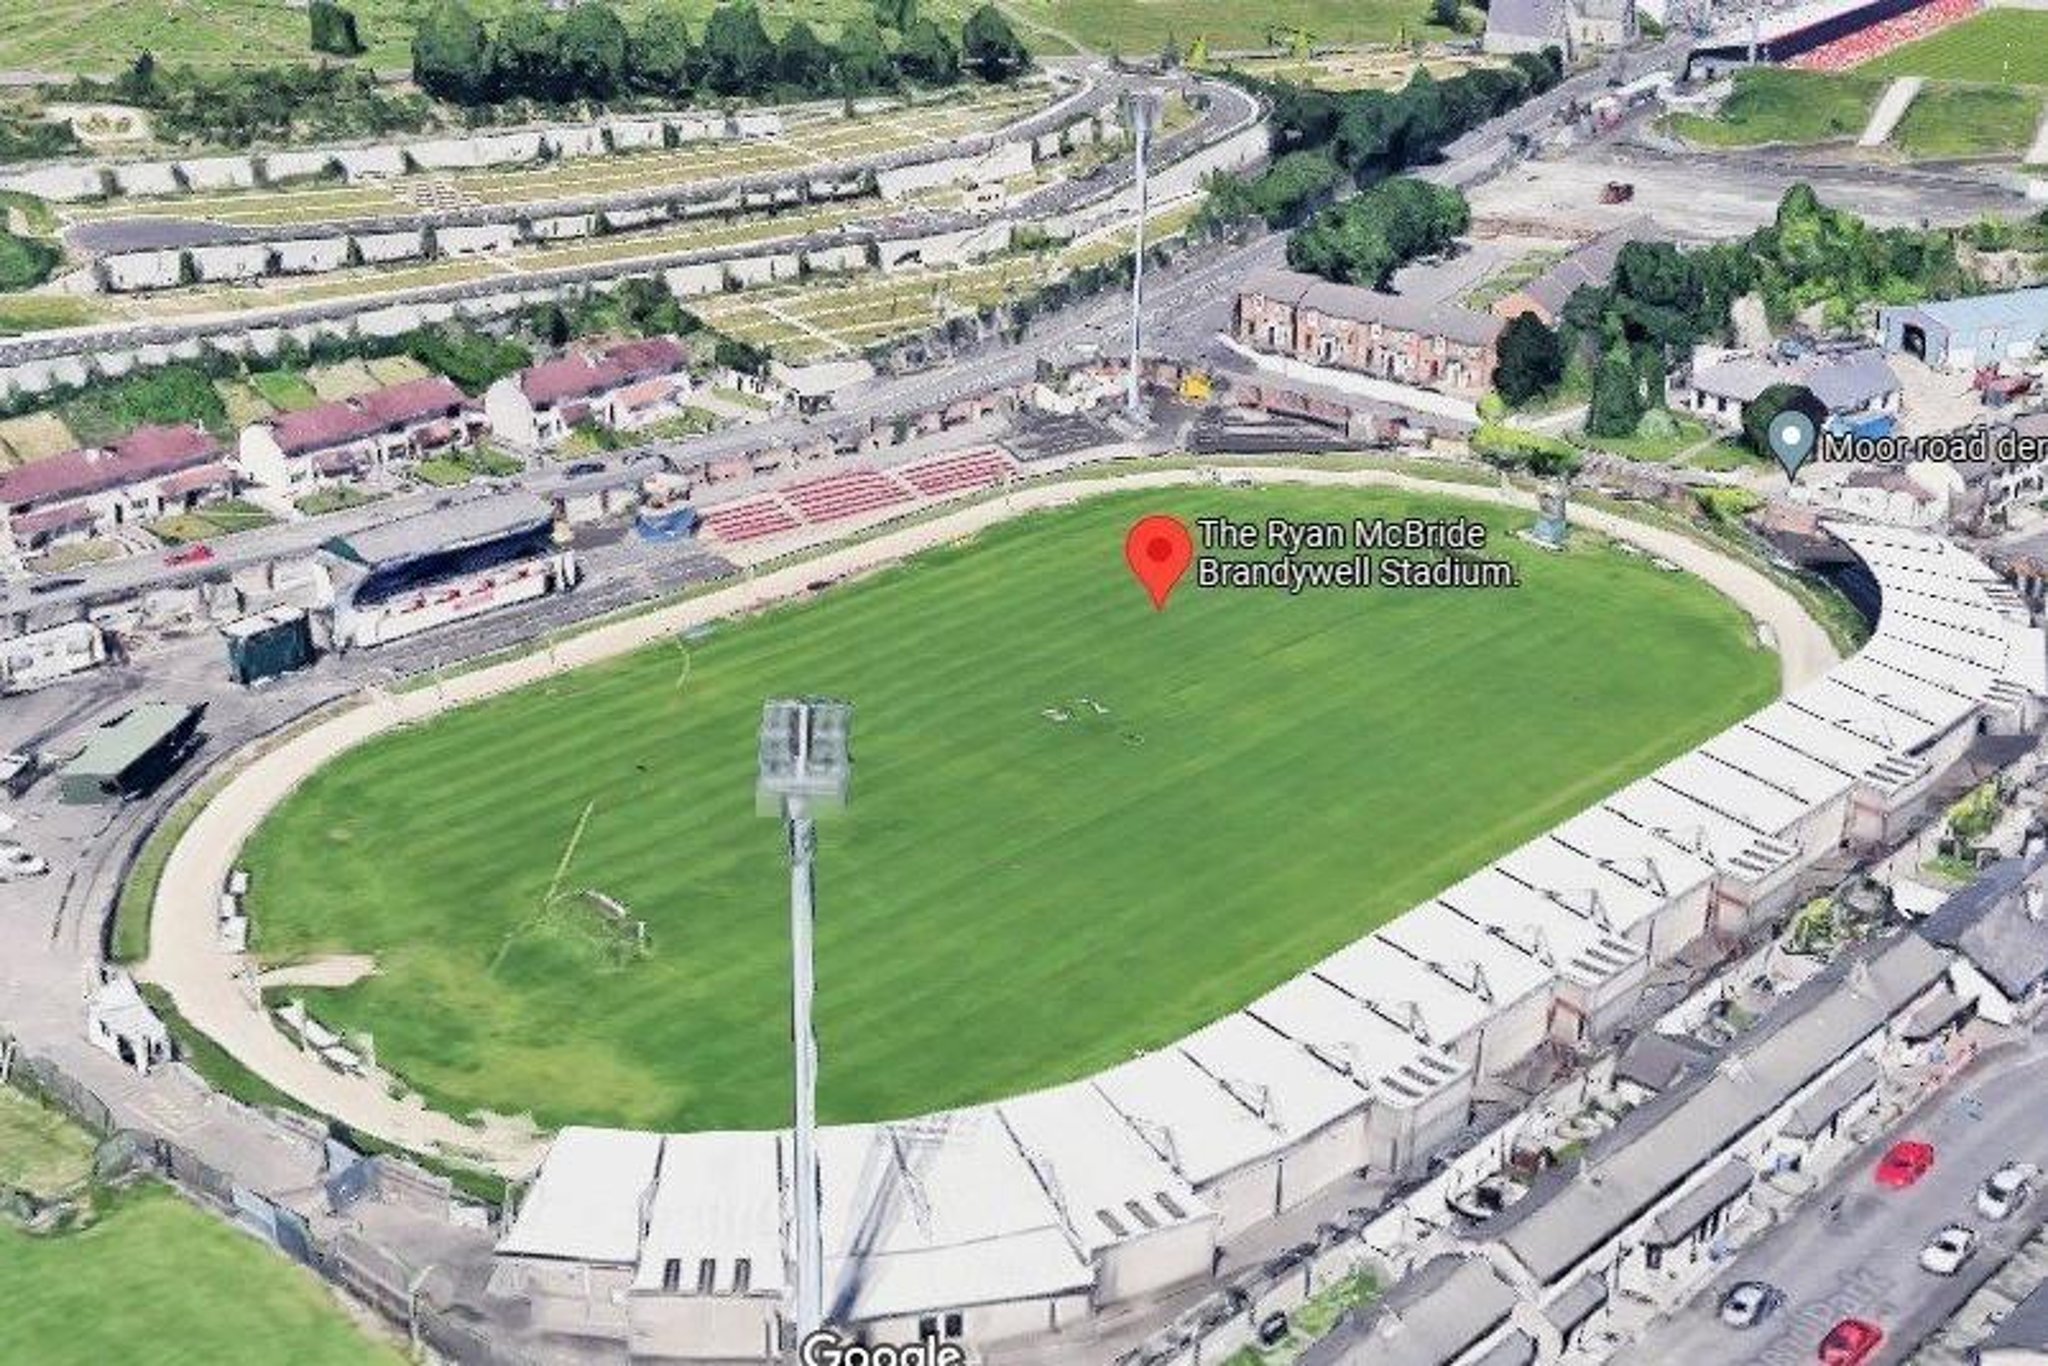 Shelving football stadium grants 'has shafted Republic of Ireland league squad Derry FC' as it puts plans for Brandywell into deep freeze